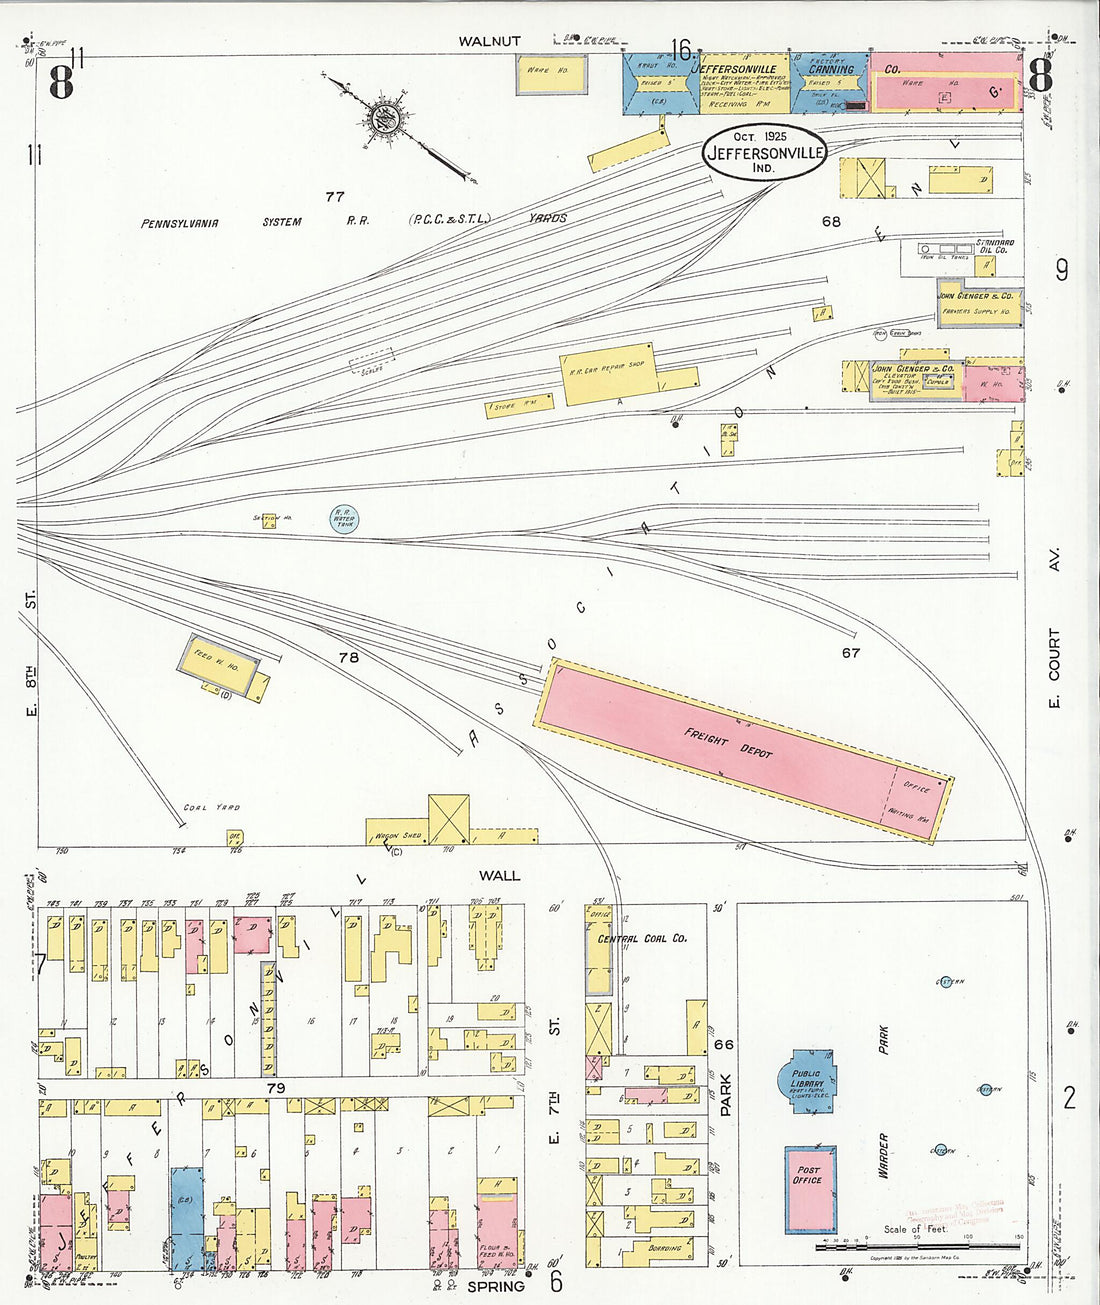 This old map of Speeds, Clark County, Indiana was created by Sanborn Map Company in 1925